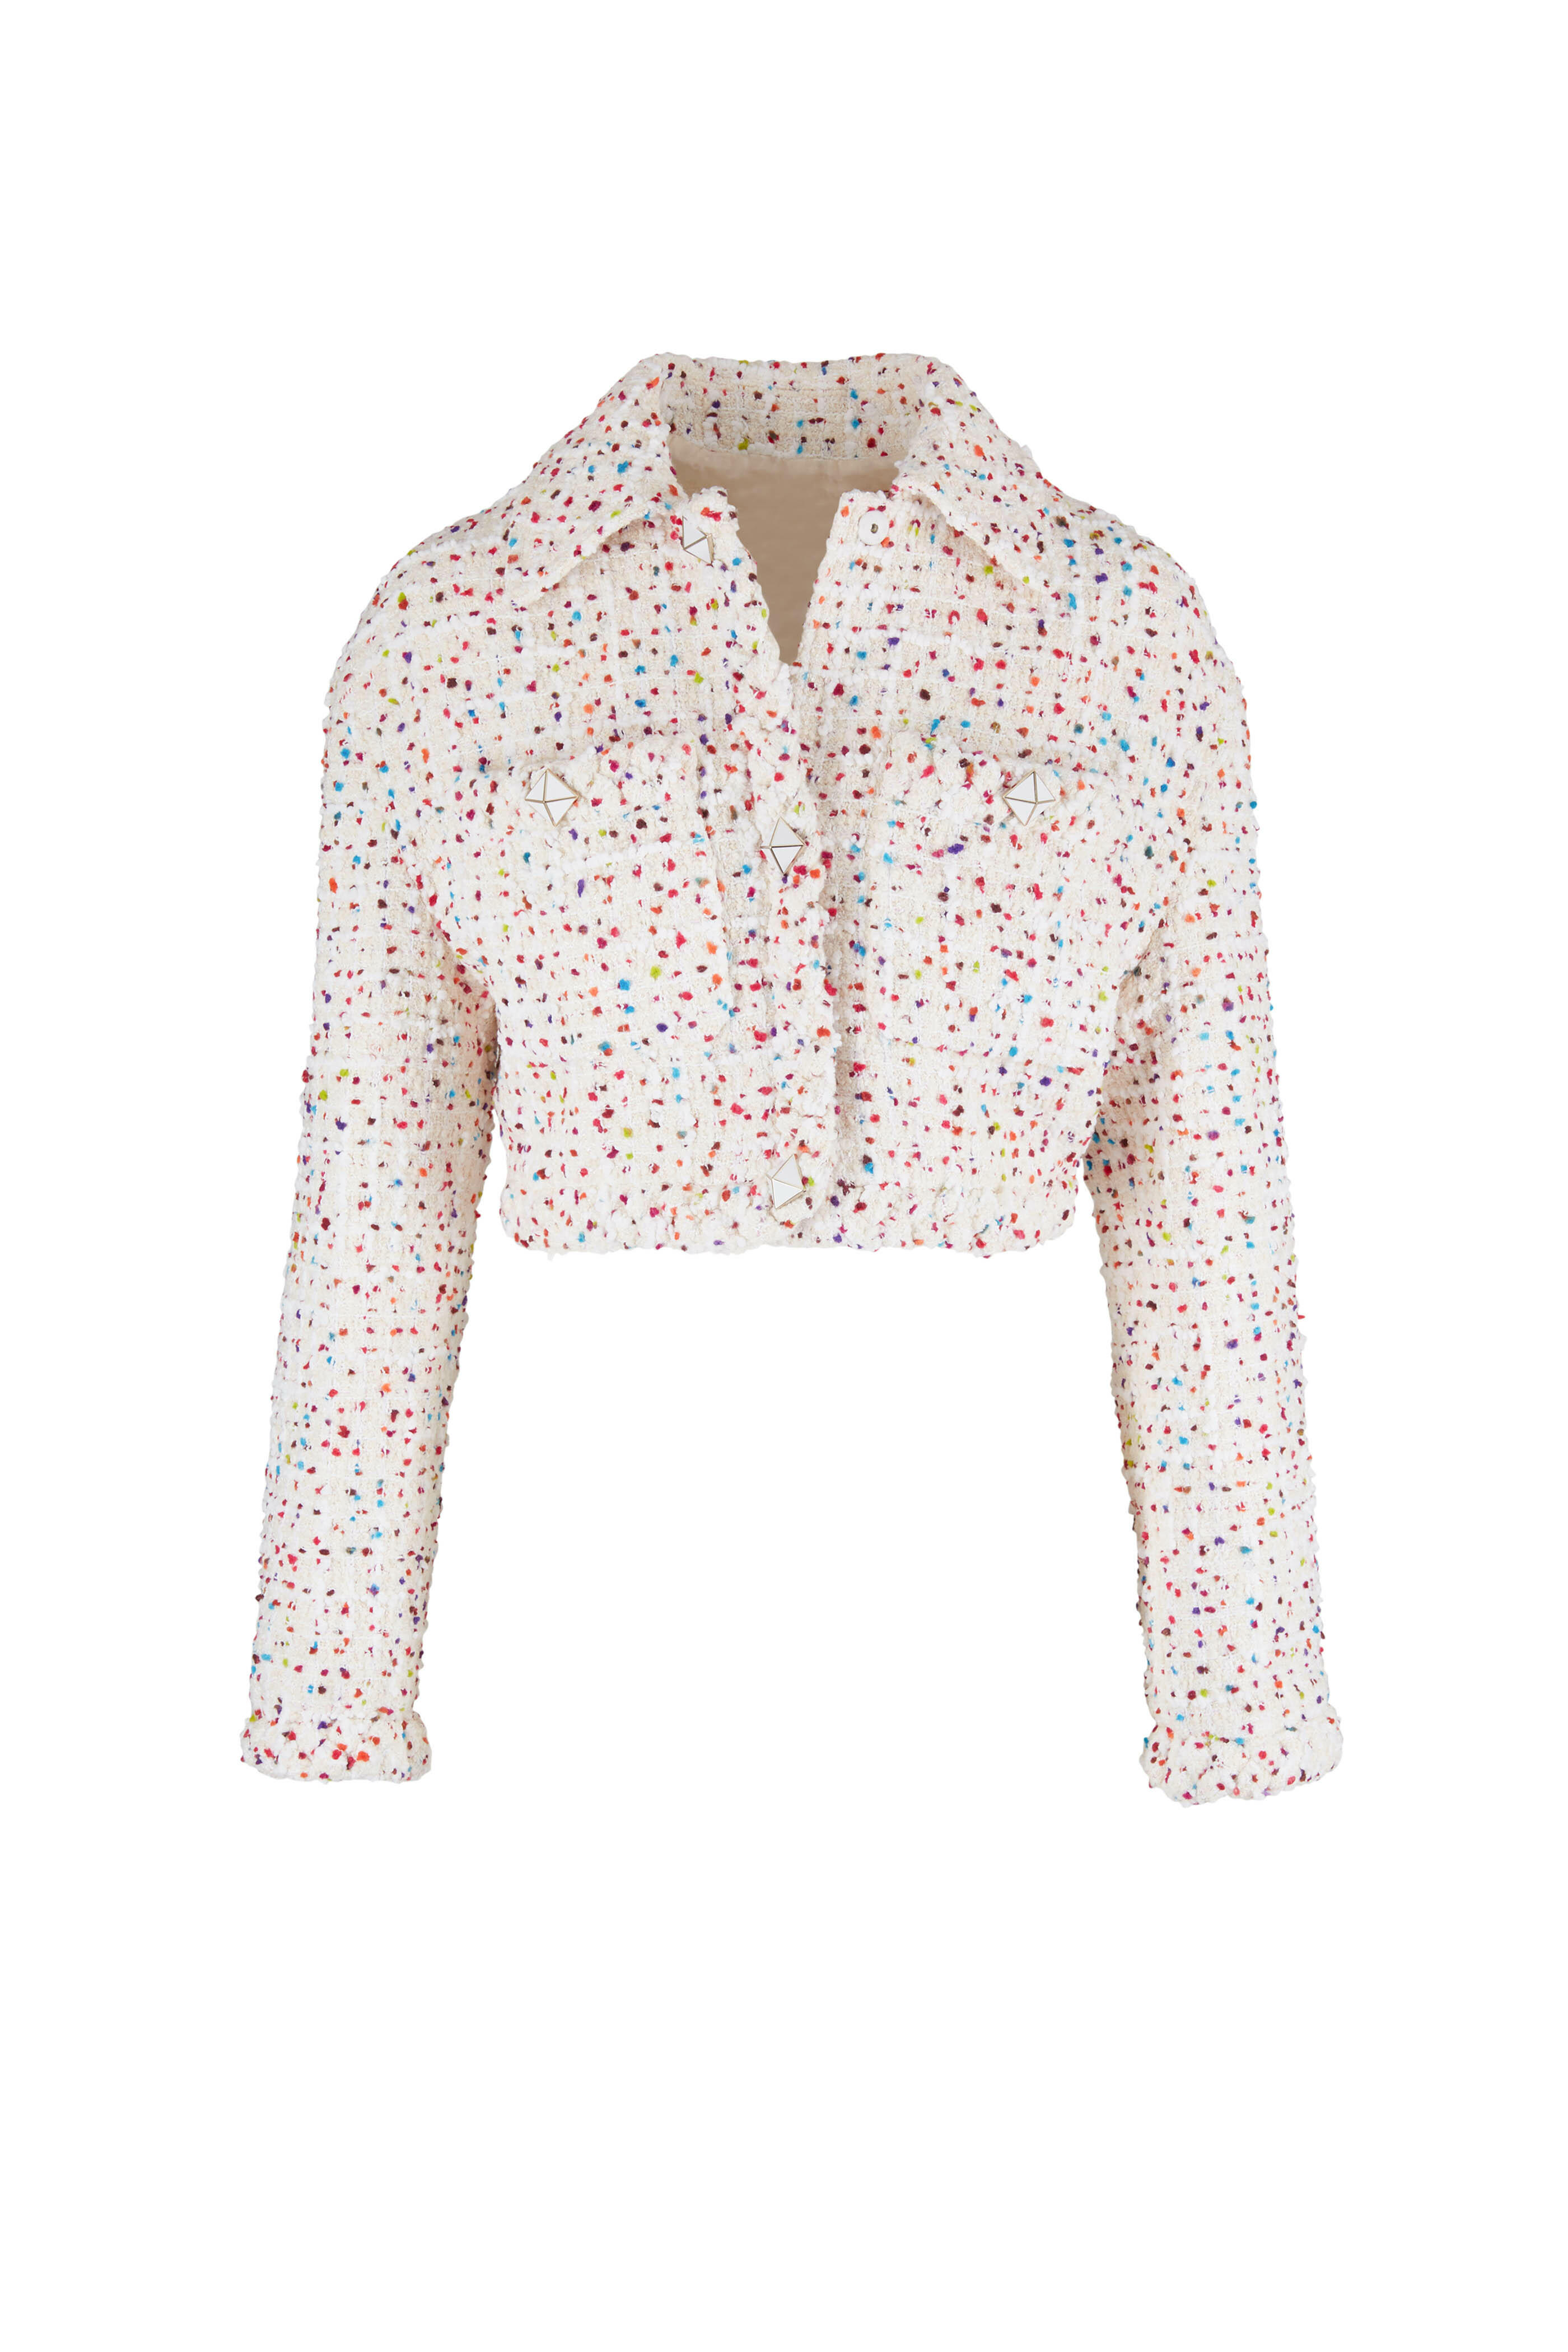 Valentino - Ivory Multicolor Tweed Pois Cropped Jacket